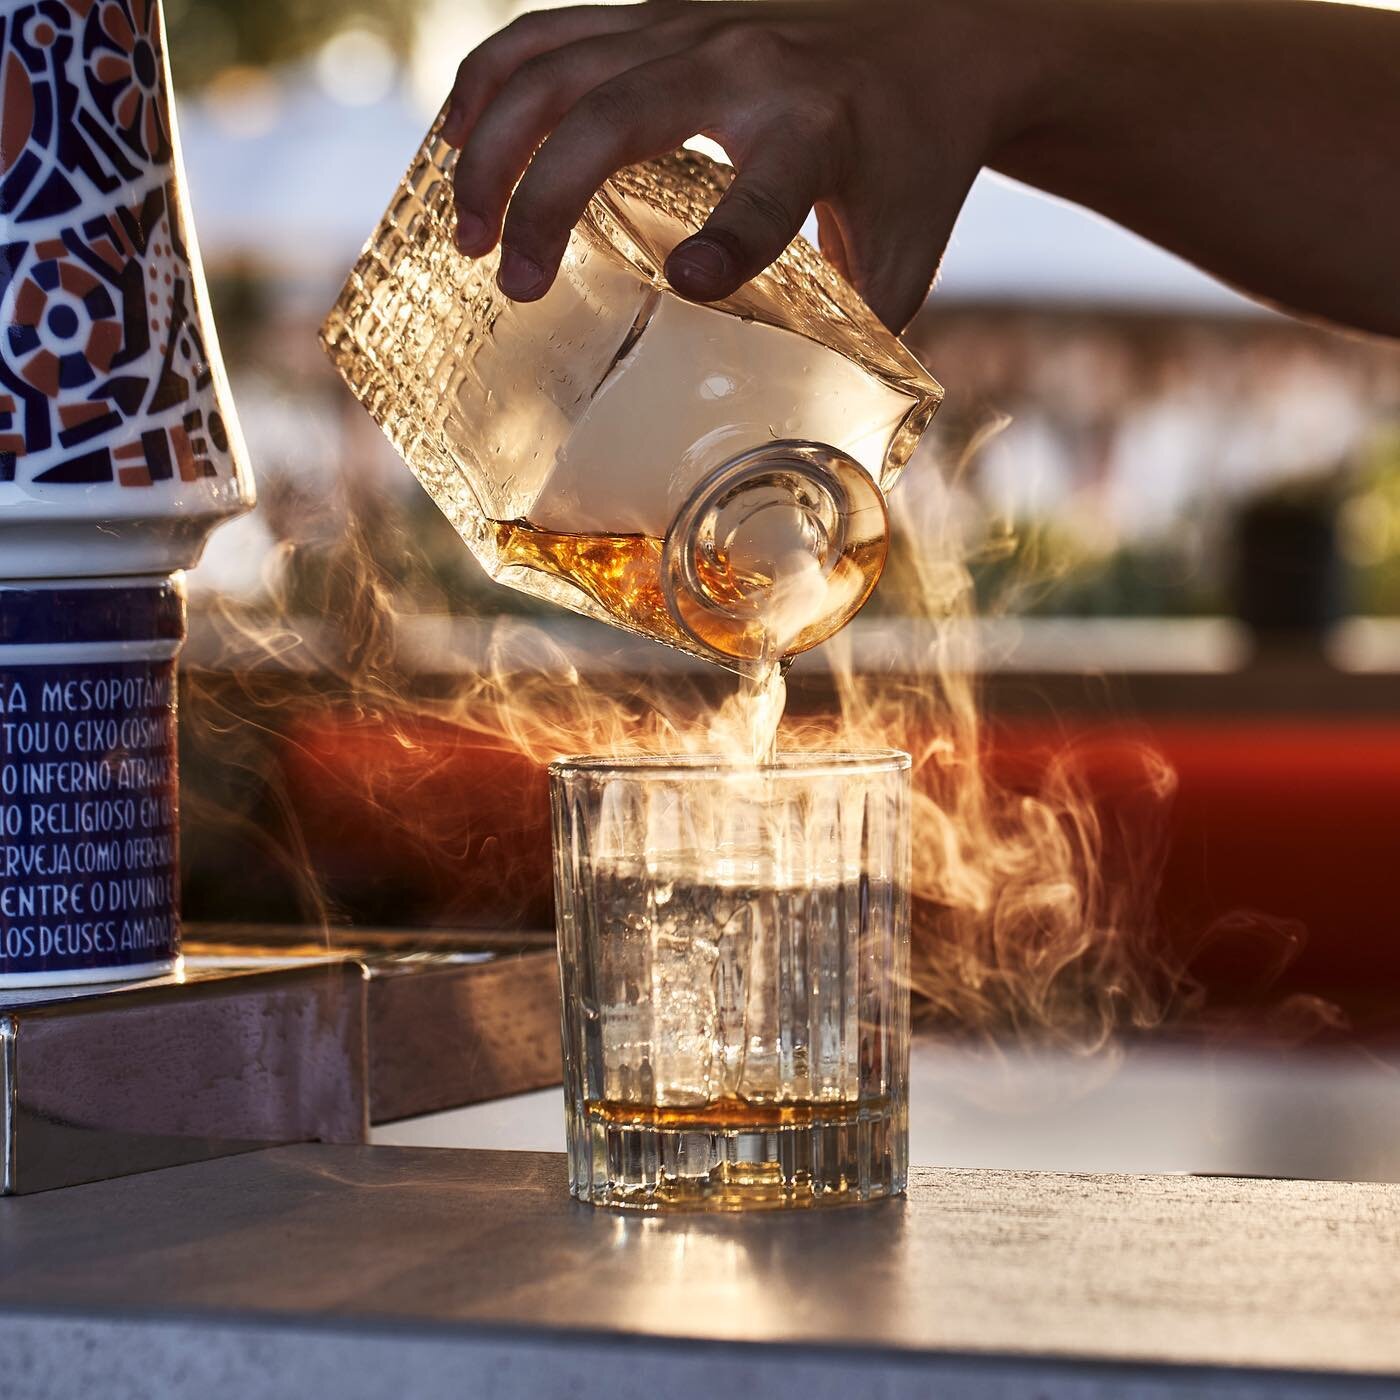 Smoky, with a touch of sweet. Meet our version of a classic Old Fashioned - made with Mexican whiskey, agave, bitters &amp; smoke. 🥃